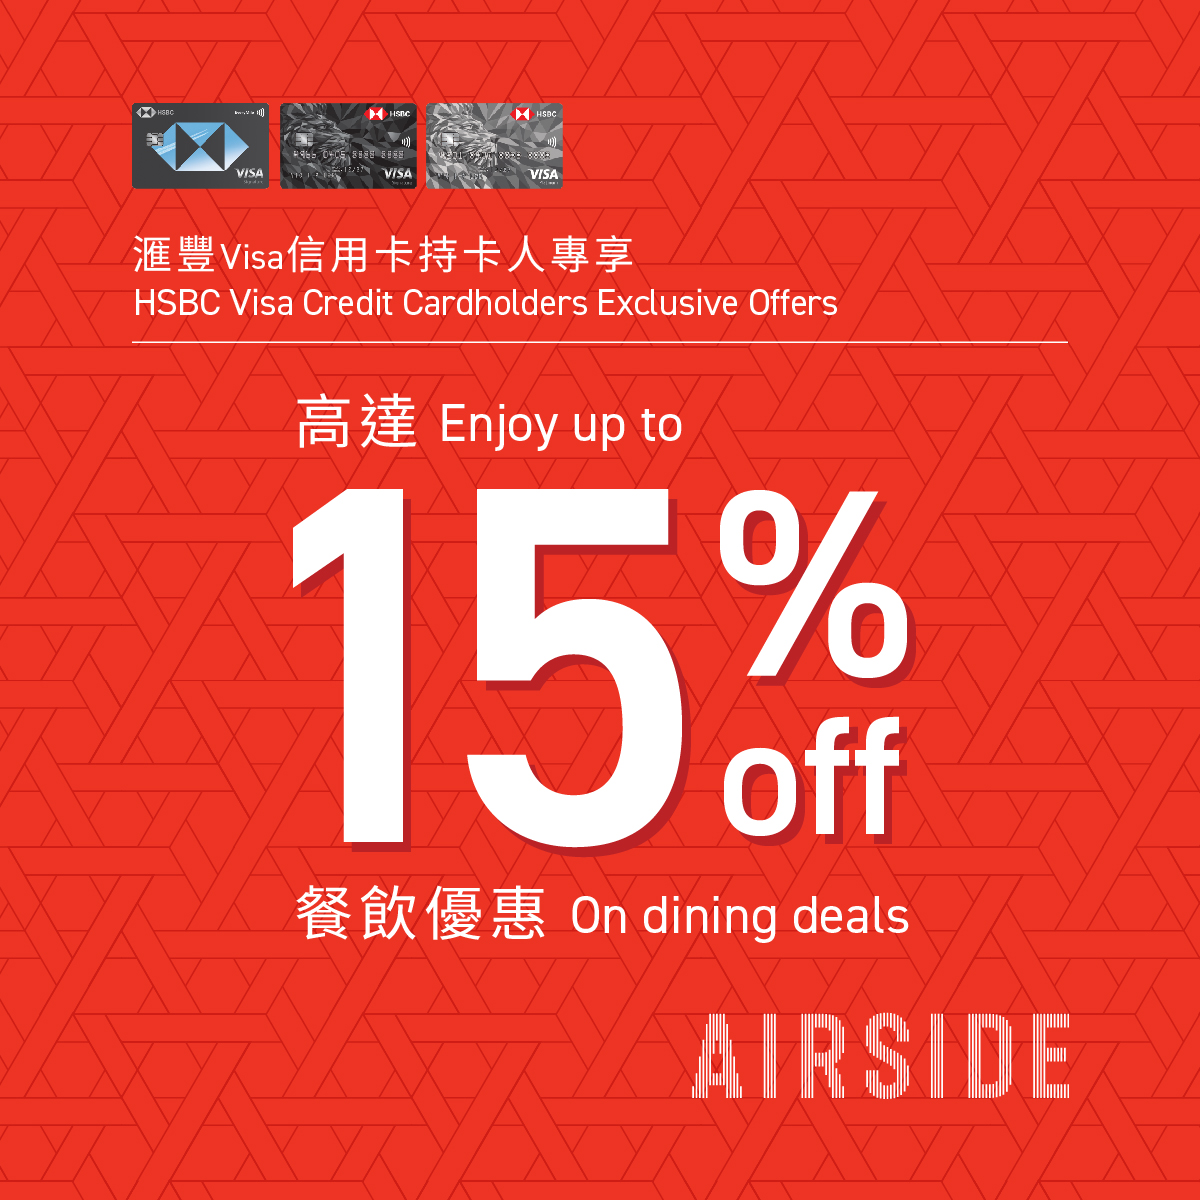 HSBC Visa Credit Cardholders Exclusive Dining Offers